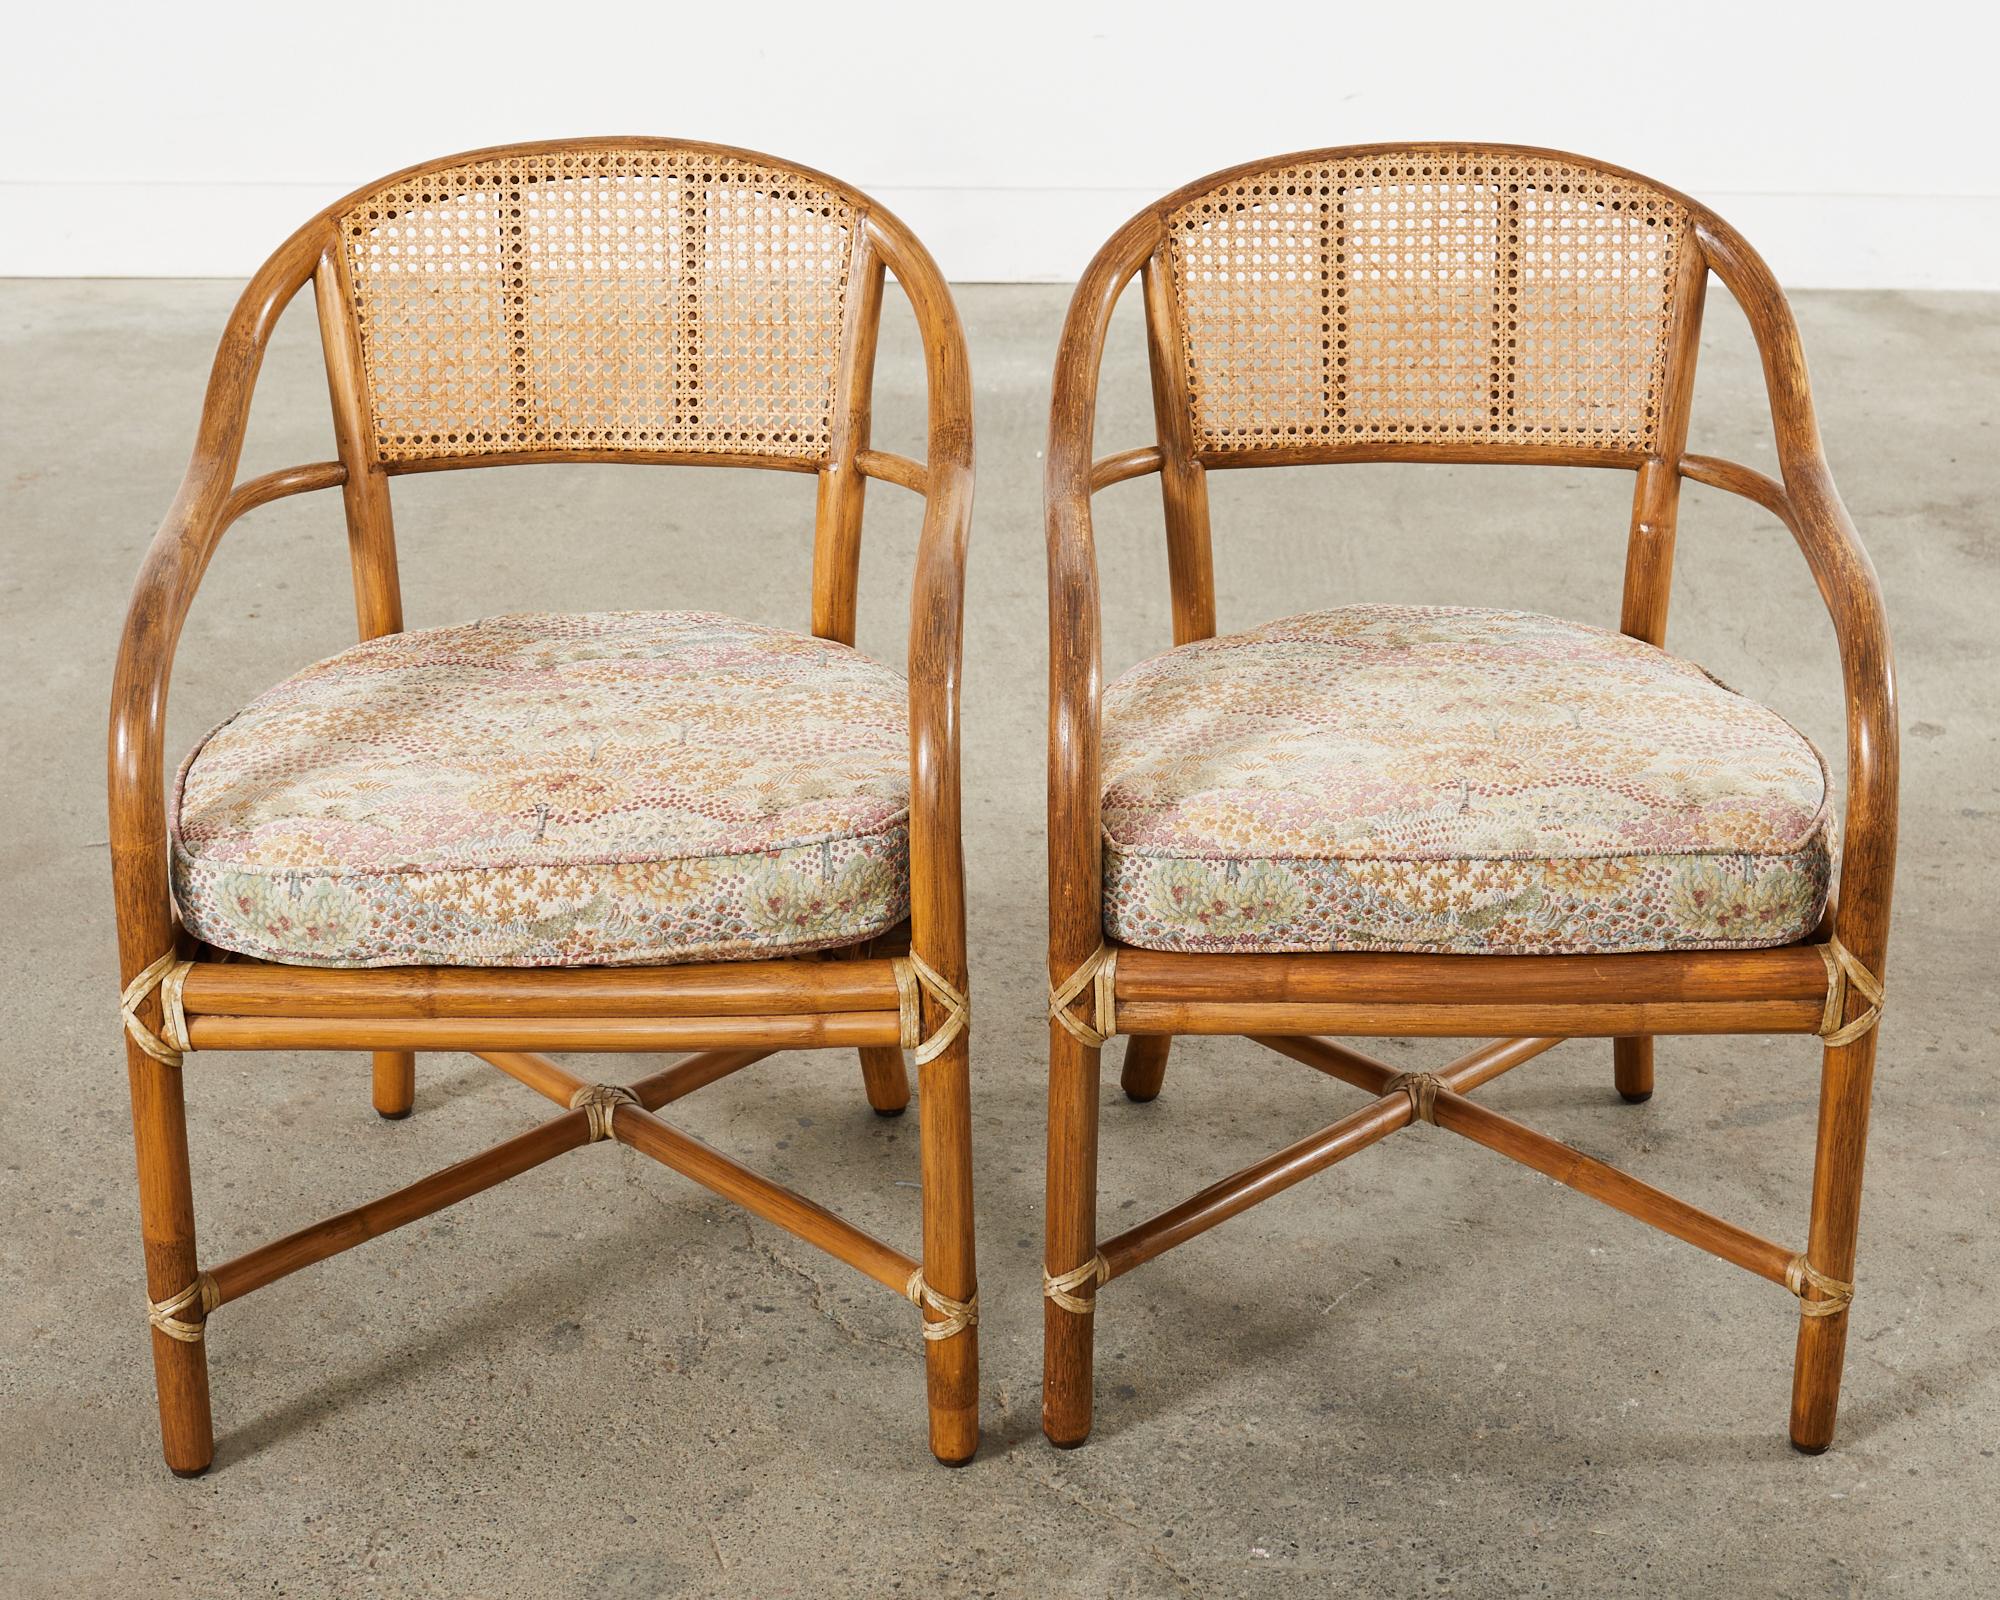 Hand-Crafted Pair of McGuire Organic Modern Rattan Cane Armchairs